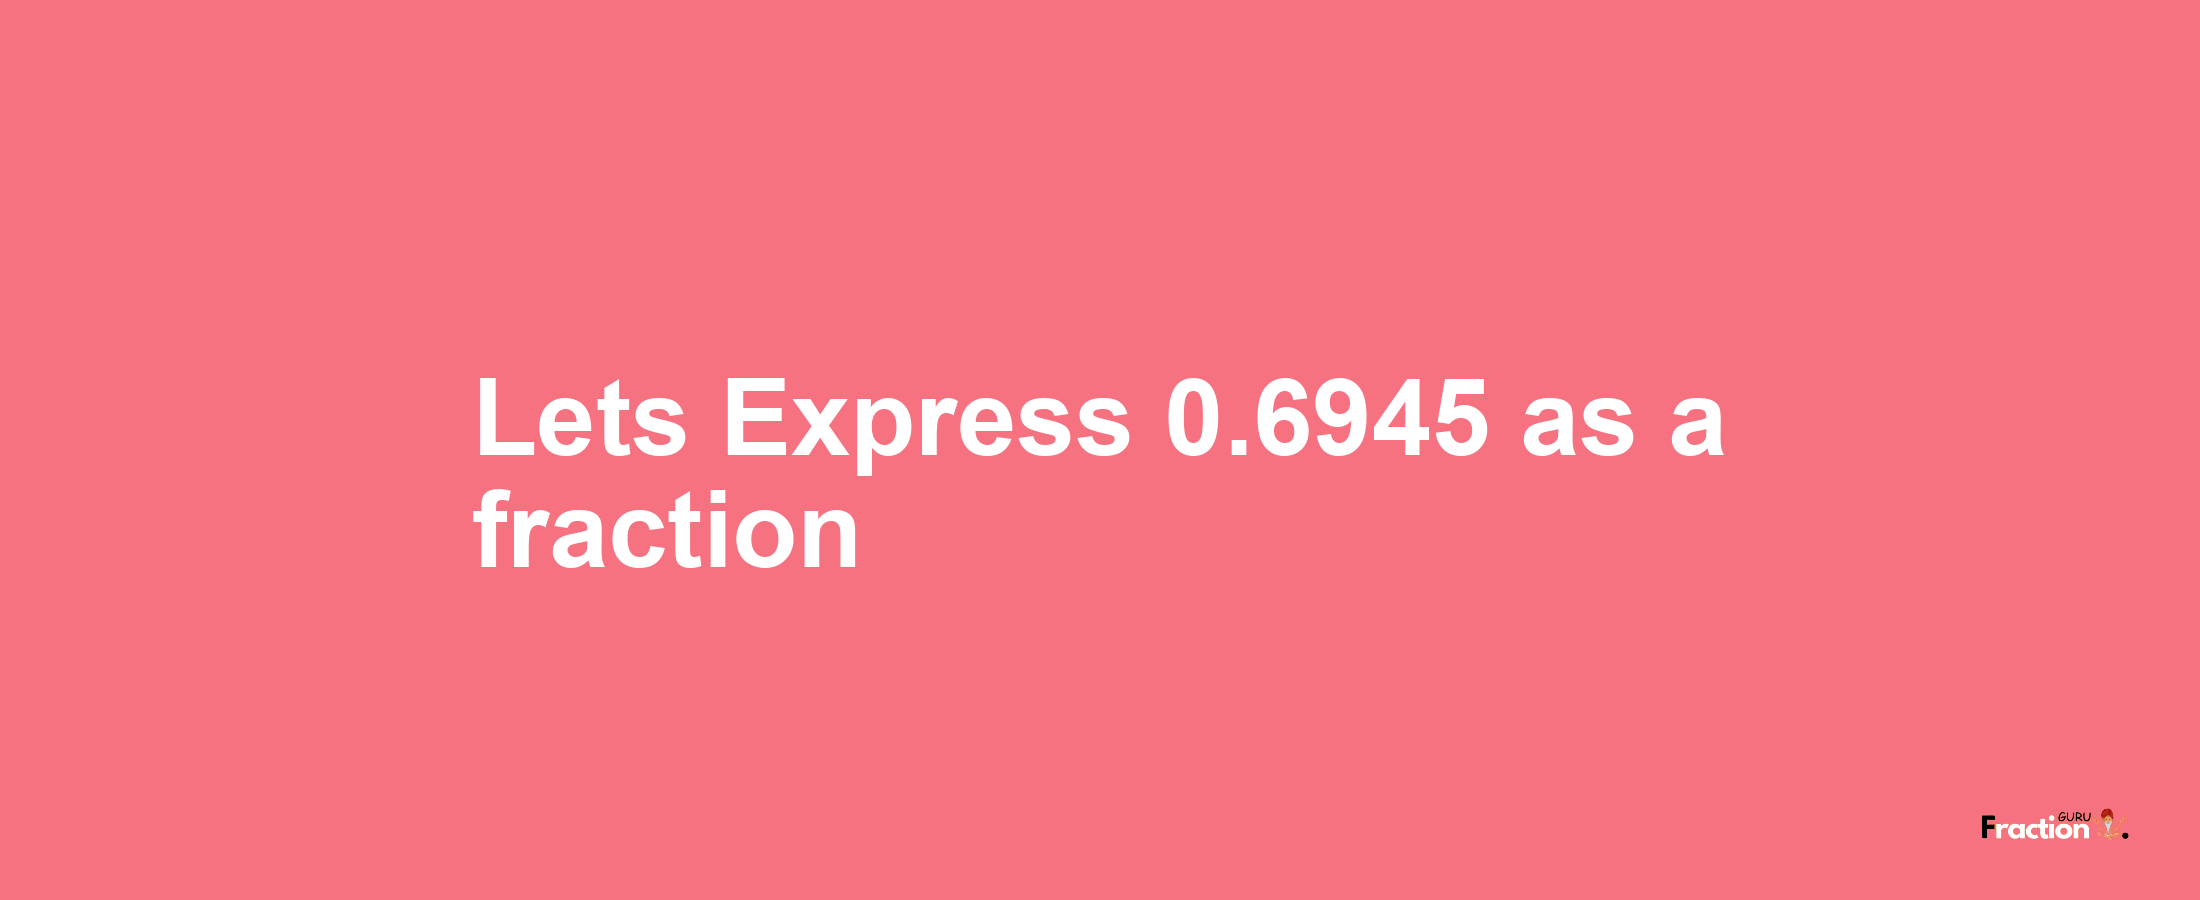 Lets Express 0.6945 as afraction